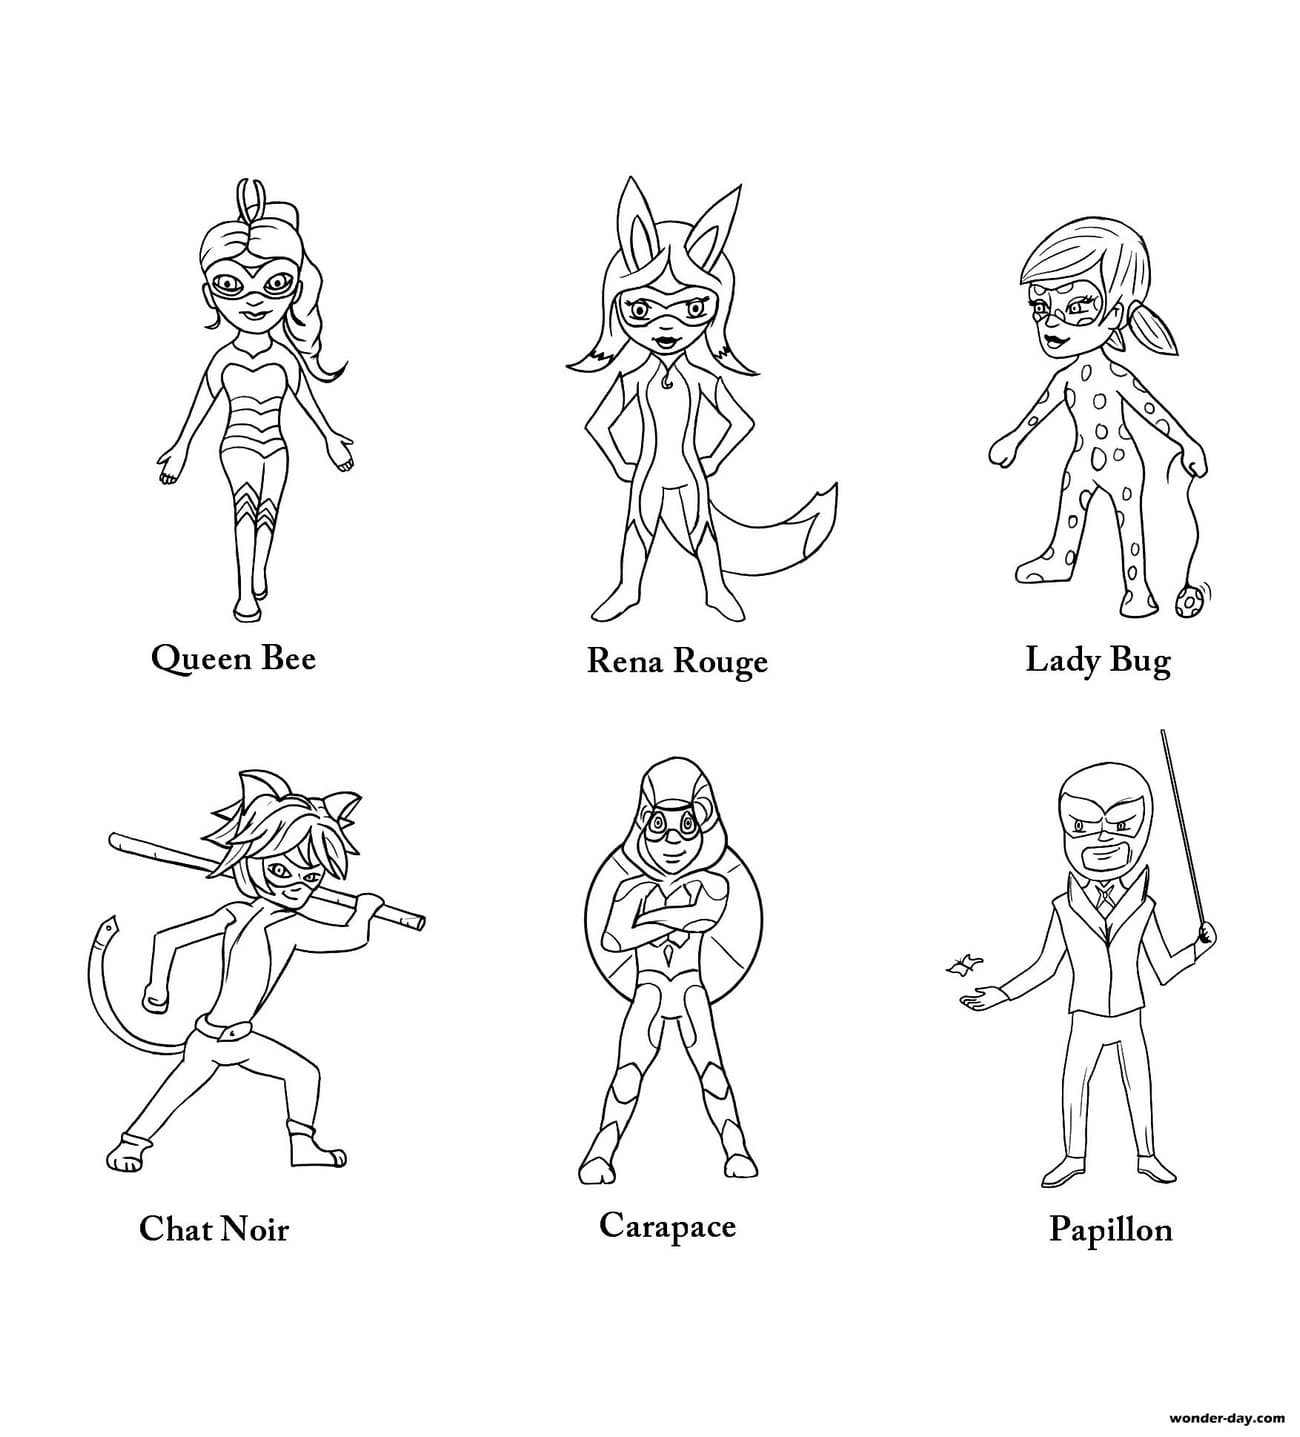 Ladybug And Cat Noir Kwami Coloring Pages Ladybug Coloring Book Pictures Miraculous Ladybug Kwami Coloring Pages For Kids Cat Noir You Will Find The Rest Of The Kwami In